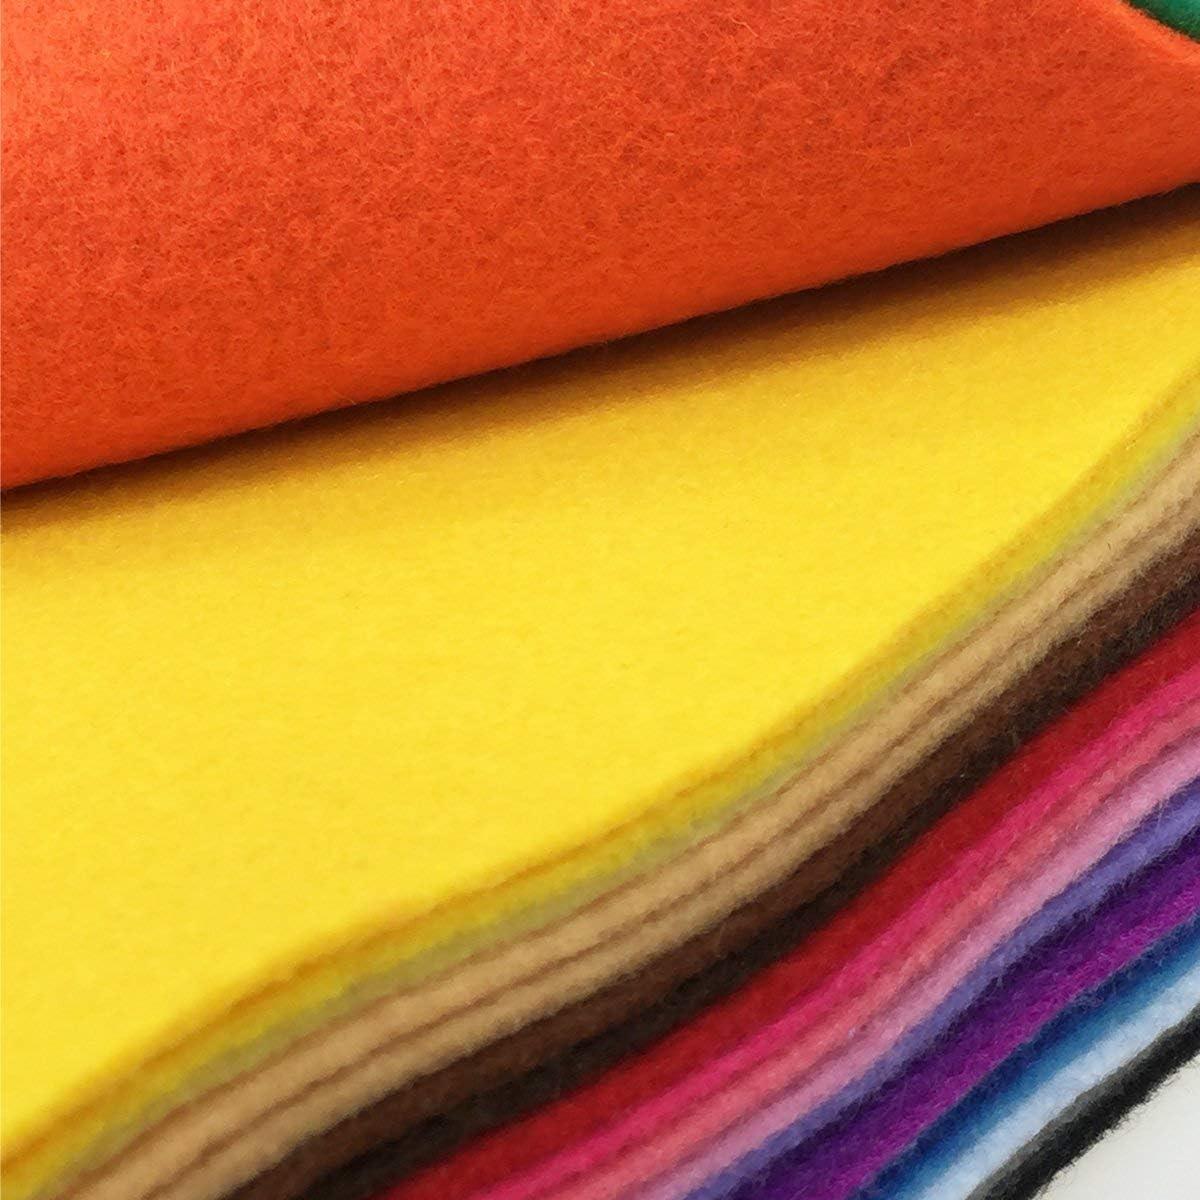 Soft Red Felt, Flexible Felt Fabric for Toy Handwork, 1.4mm Thick 12x12  Felt Sheets for DIY Craft and Sewing Projects